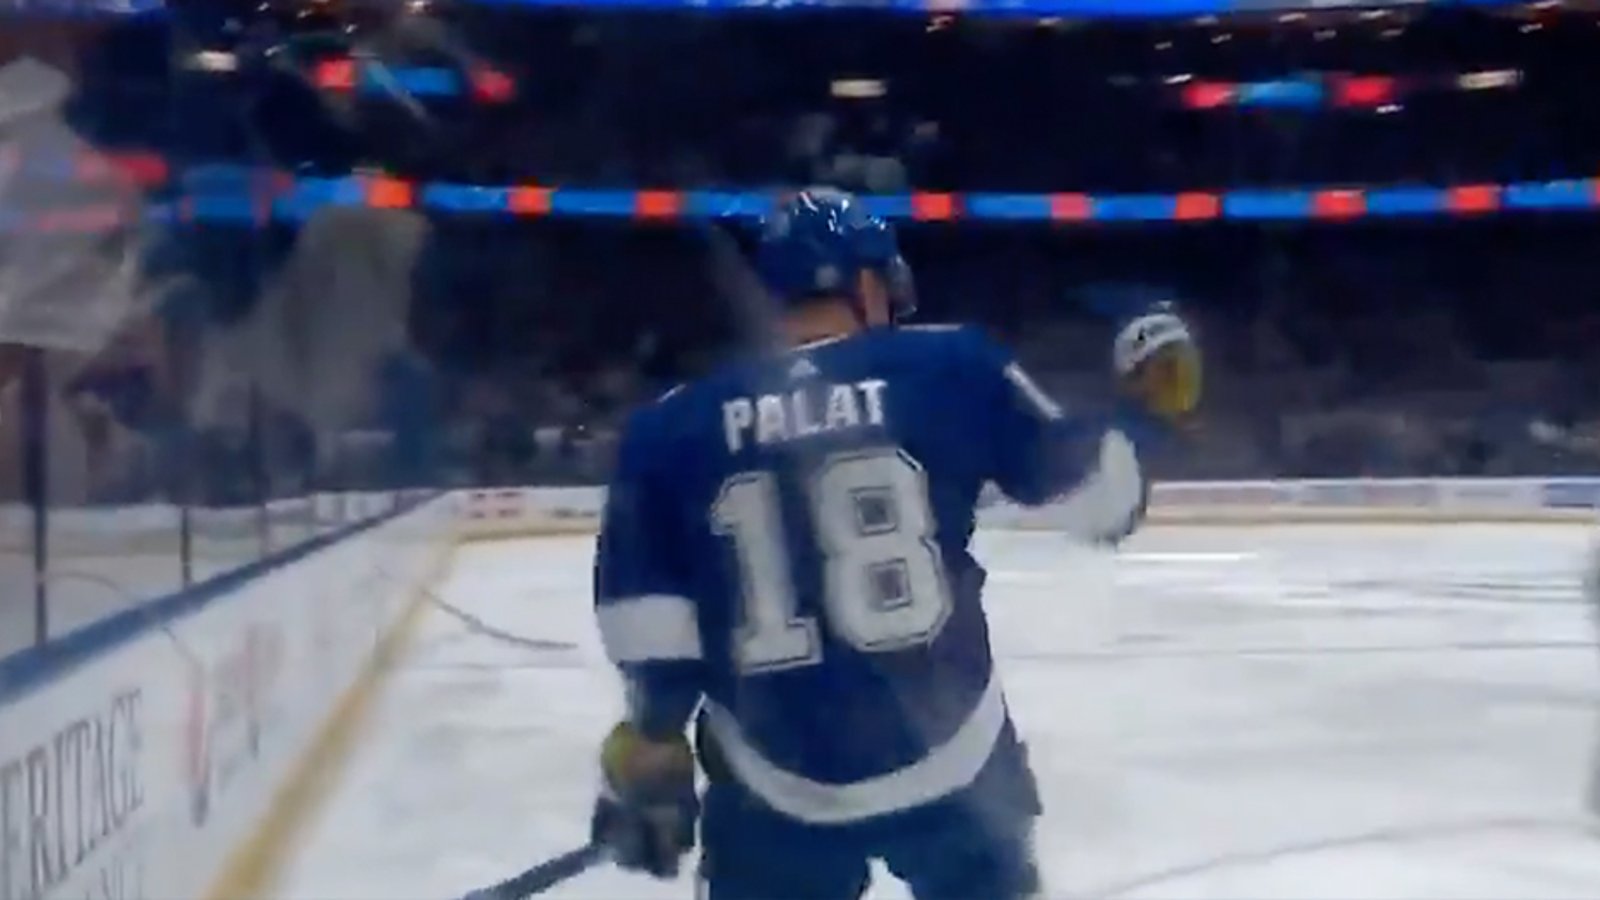 Palat bats it out of mid-air for an absolute beauty!